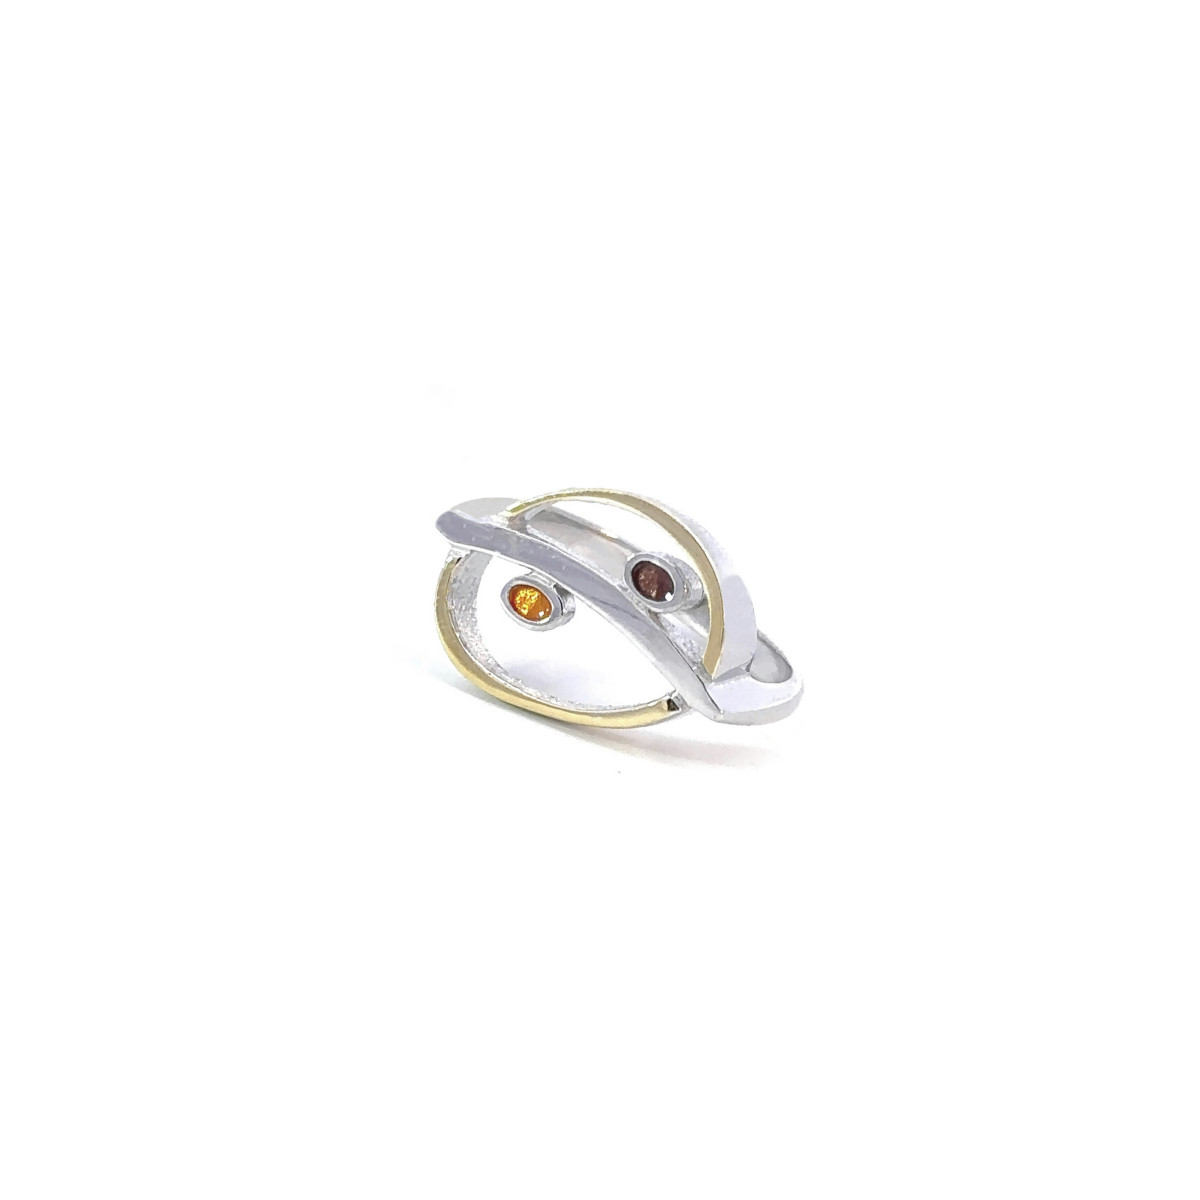 Silver, gold and enamel ring